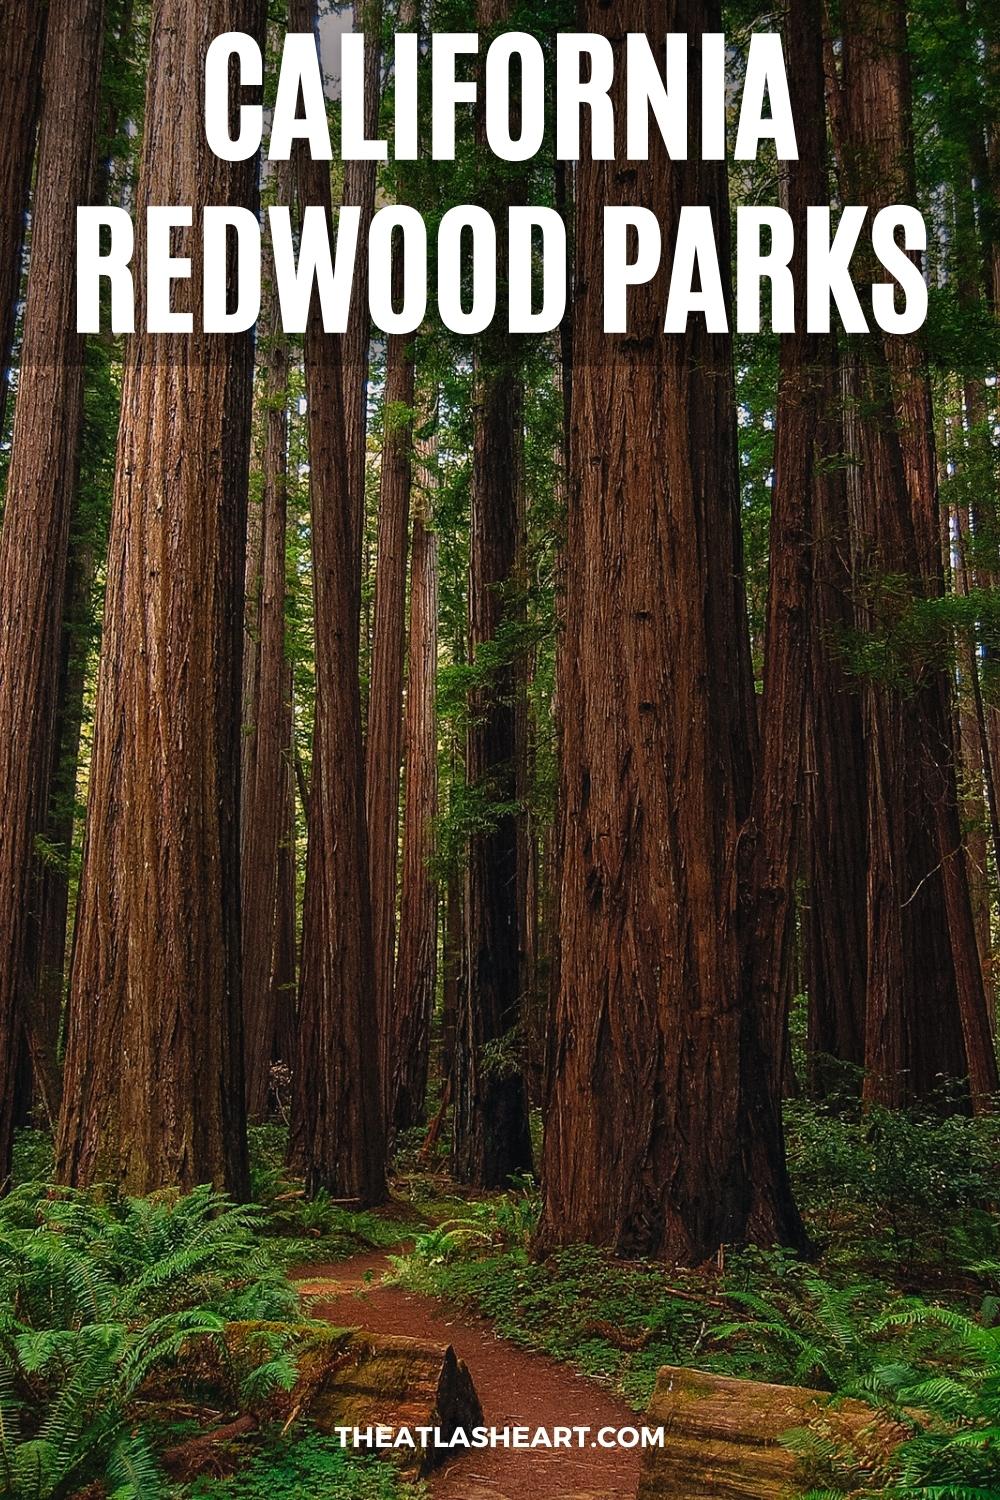 45 California Redwood Parks: Ultimate Guide to the Best Redwoods in California